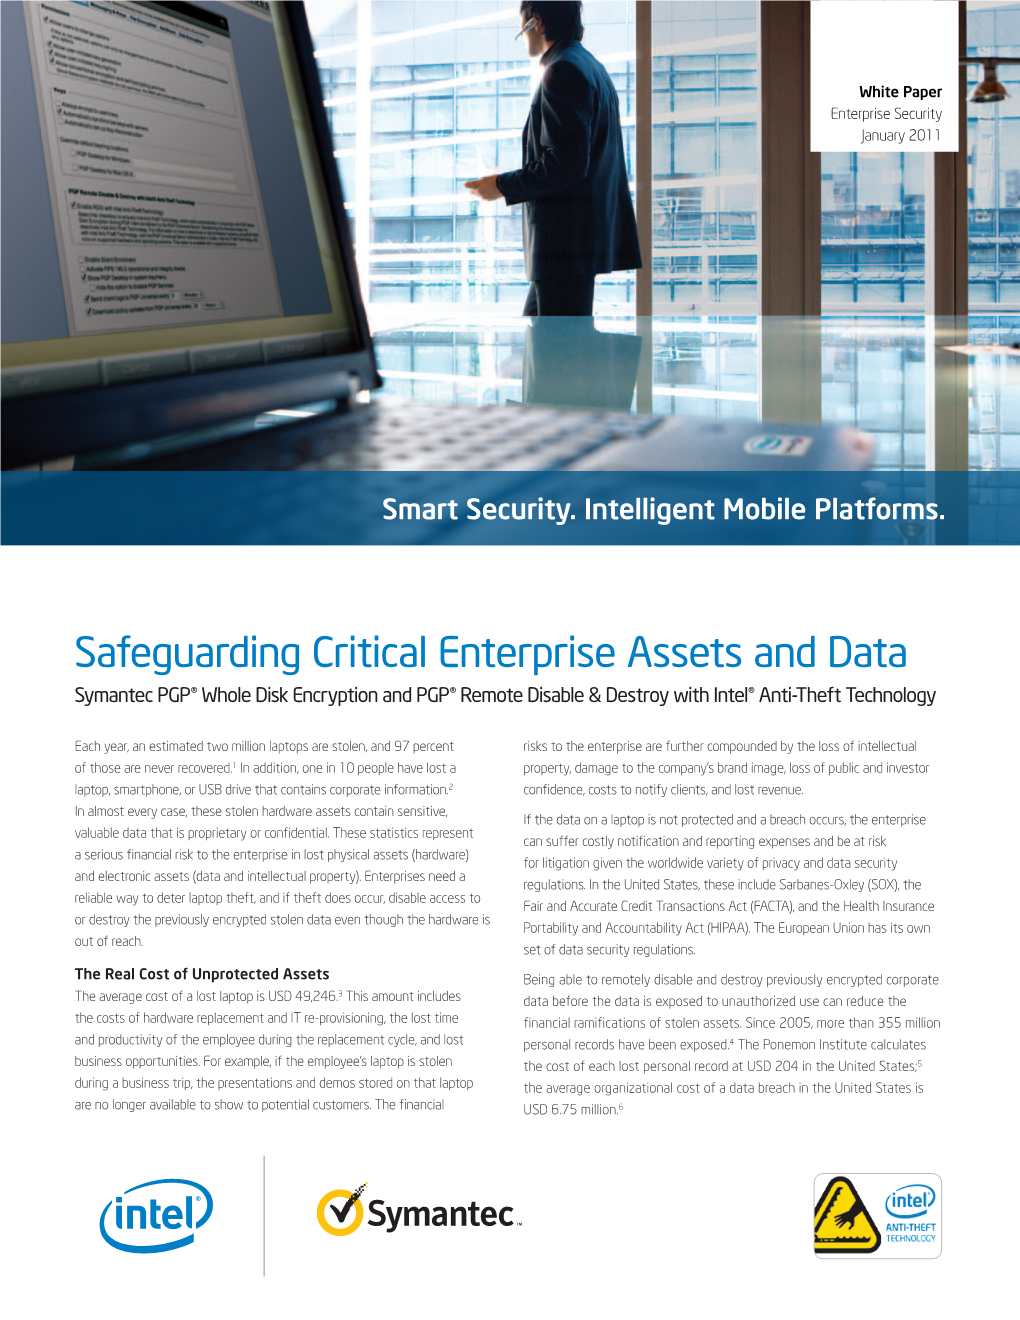 Safeguarding Critical Enterprise Assets and Data Symantec PGP® Whole Disk Encryption and PGP® Remote Disable & Destroy with Intel® Anti-Theft Technology